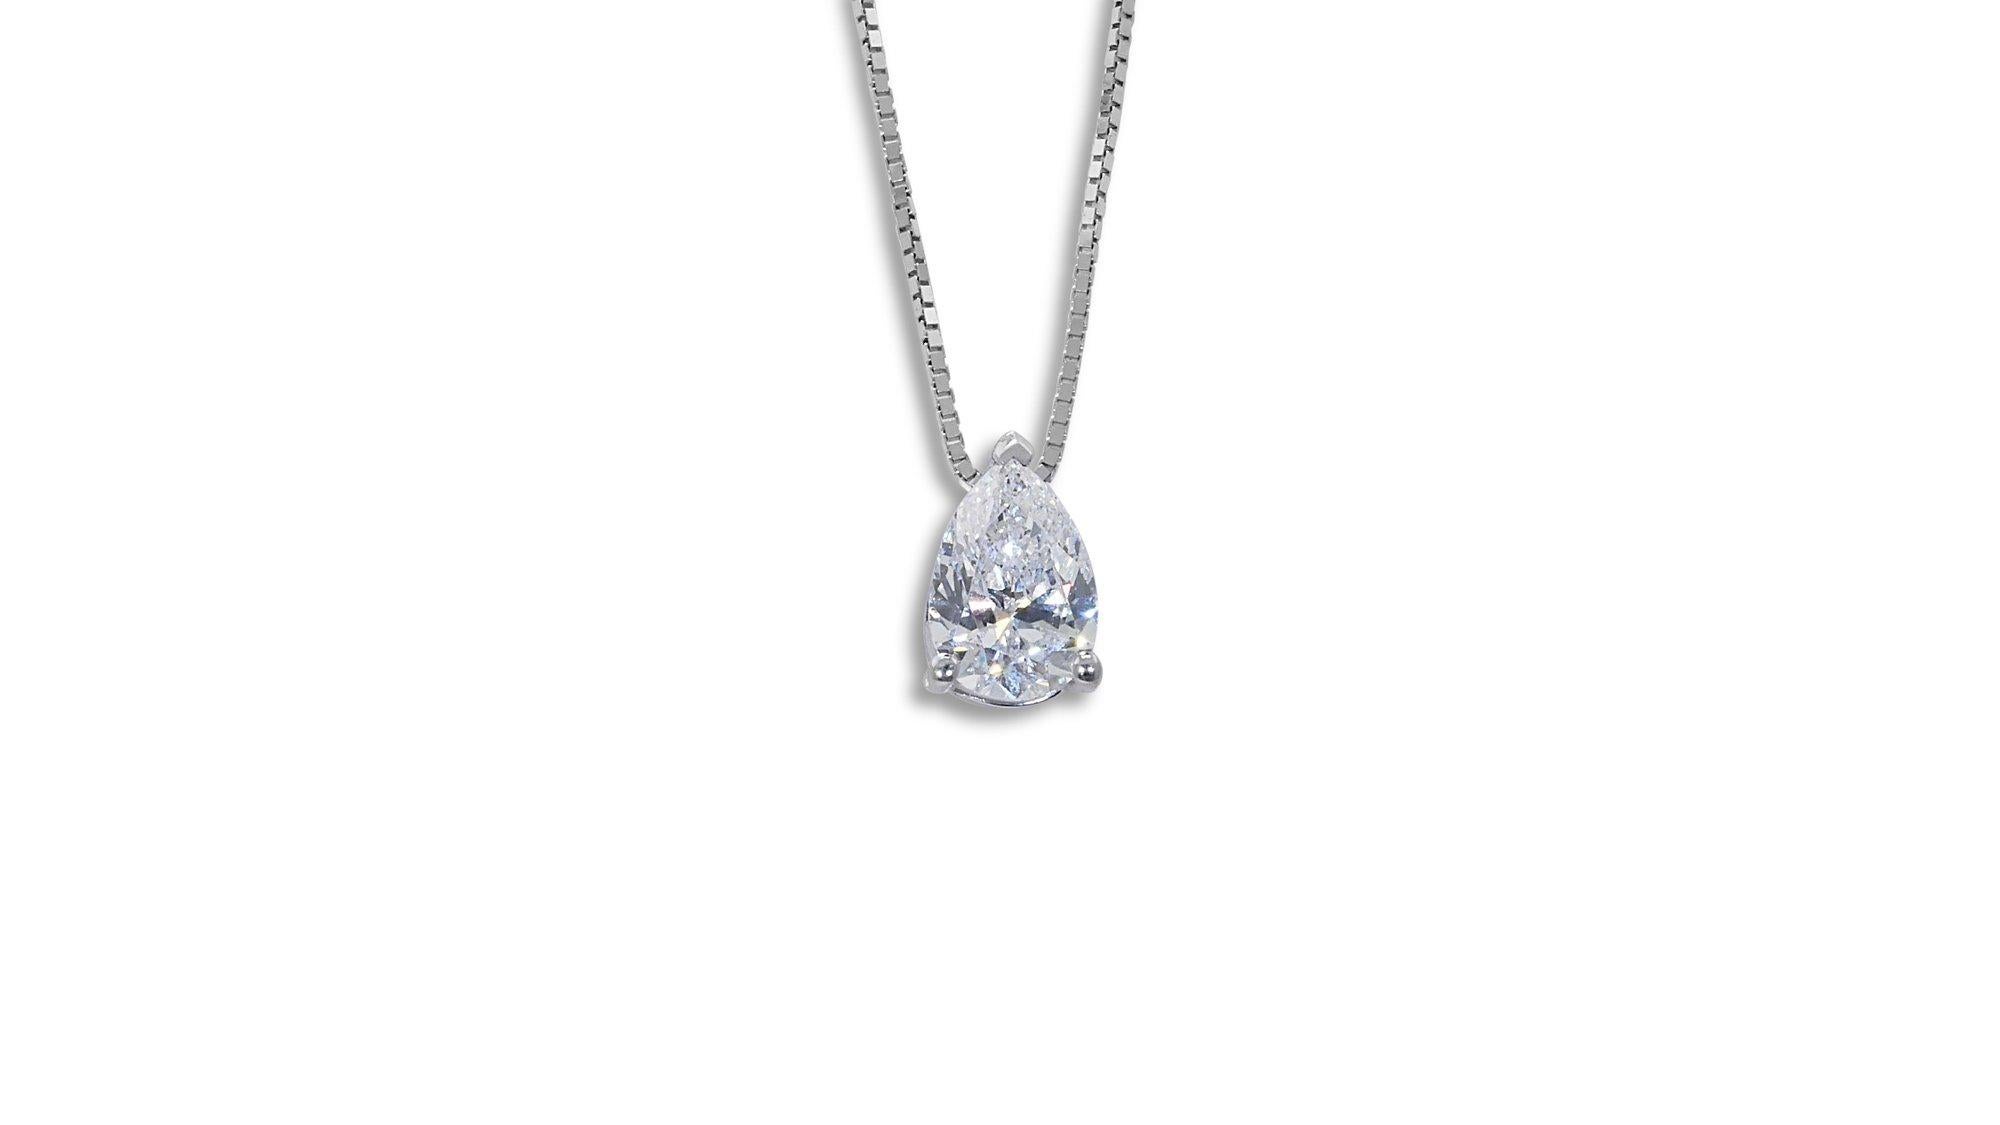 Dazzling 18k White Gold Pendant Necklace with a 0.90 carat brilliant diamond For Sale 2